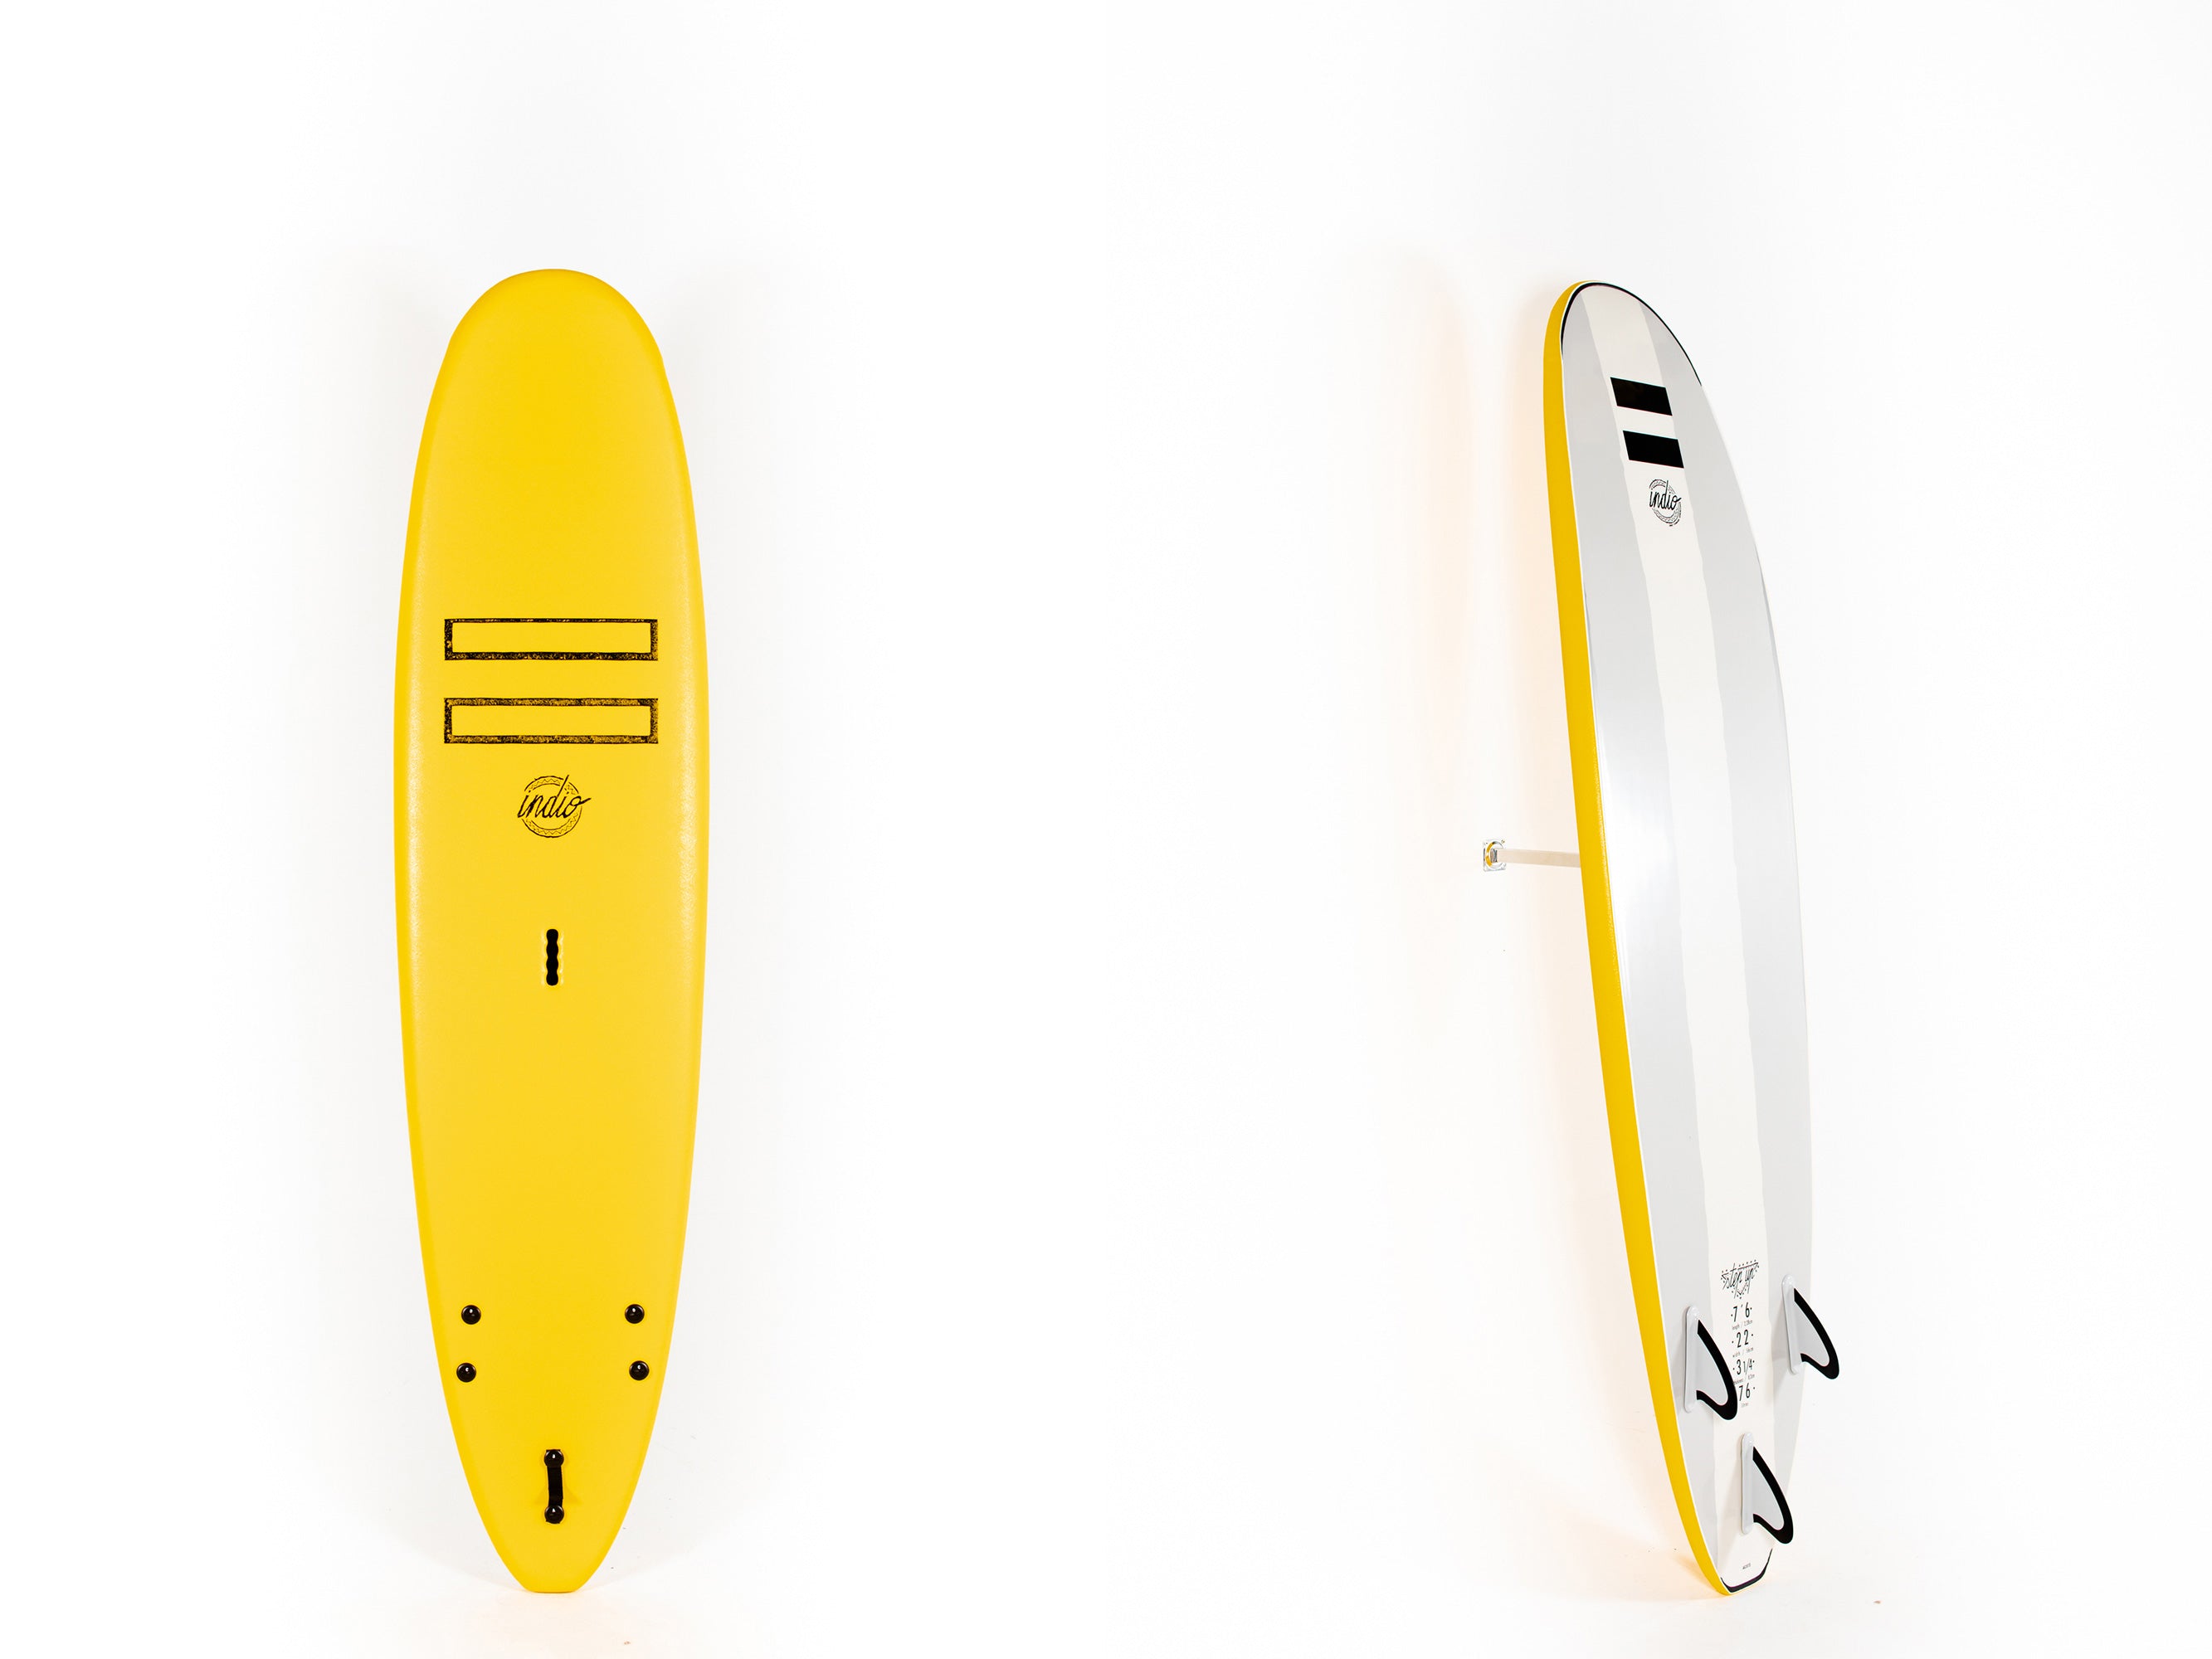 Pukas Surf Shop Indio Surfboards step up